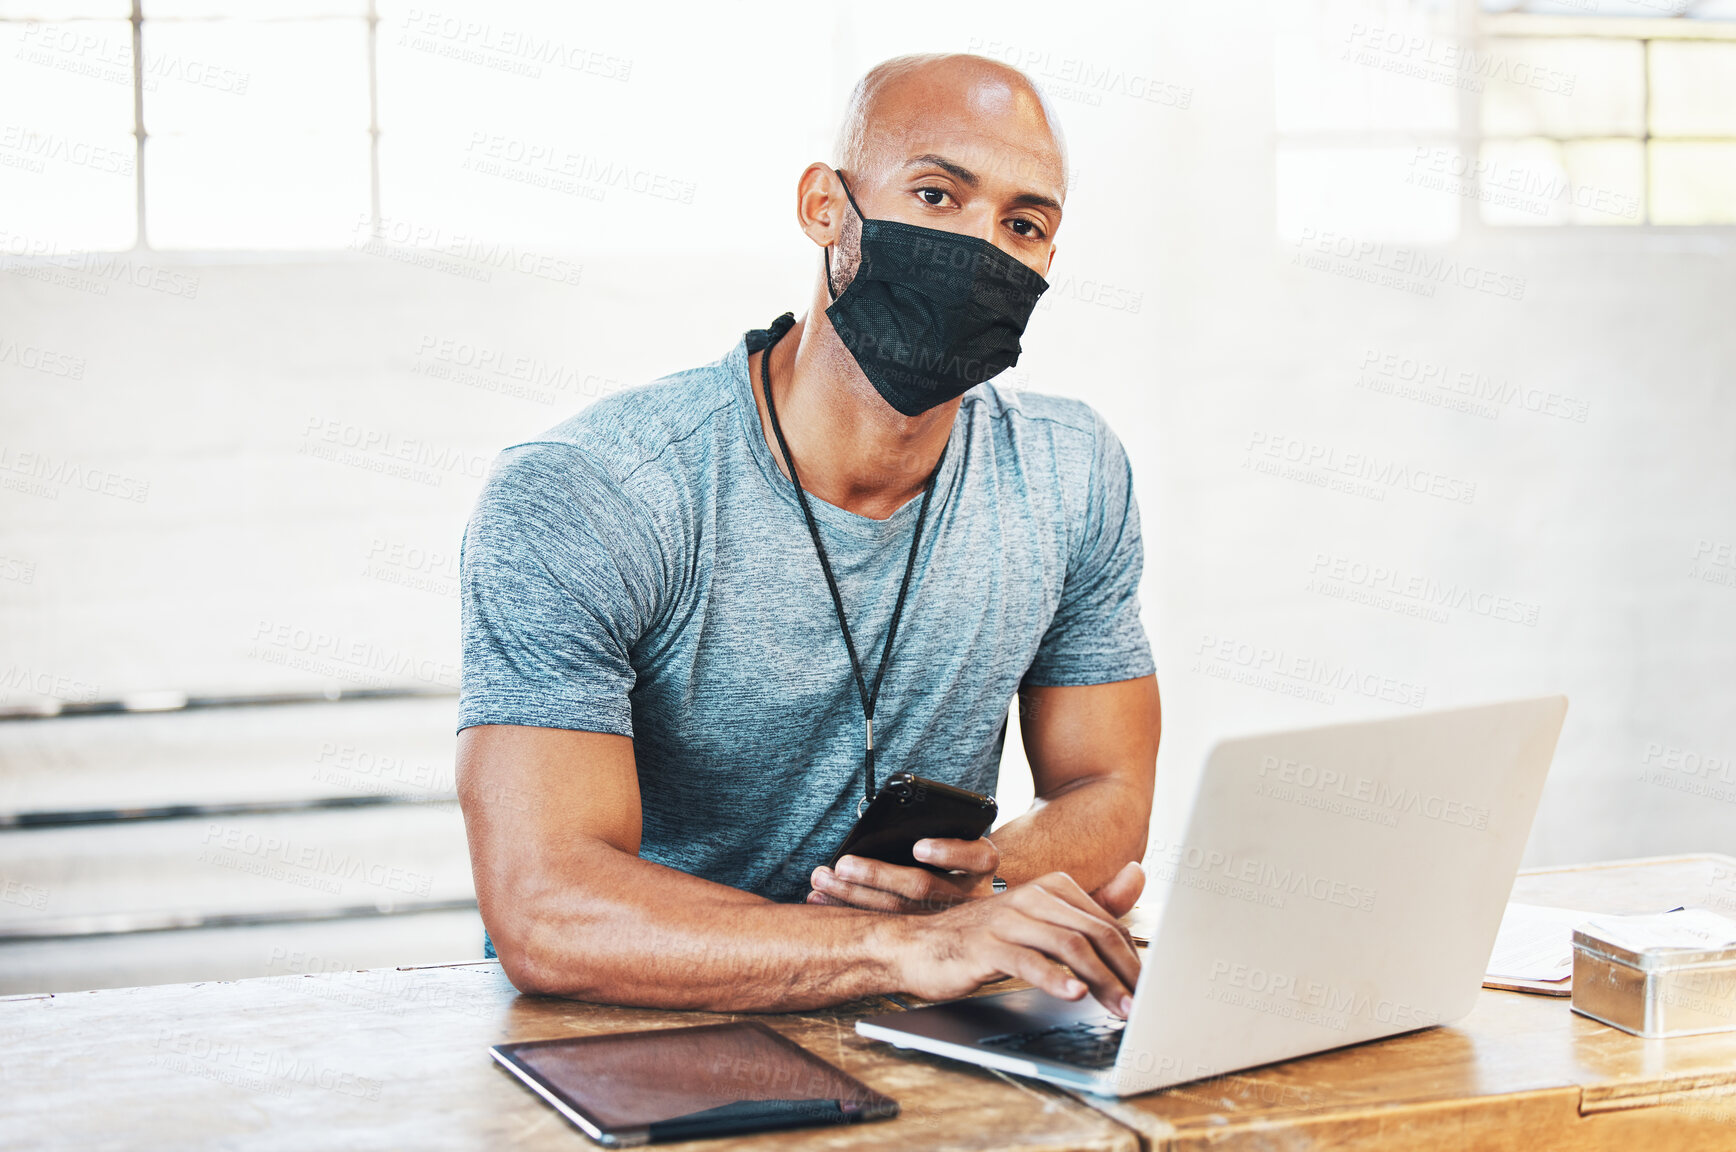 Buy stock photo Portrait of a muscular young man wearing a face mask and using a laptop while working in a gym